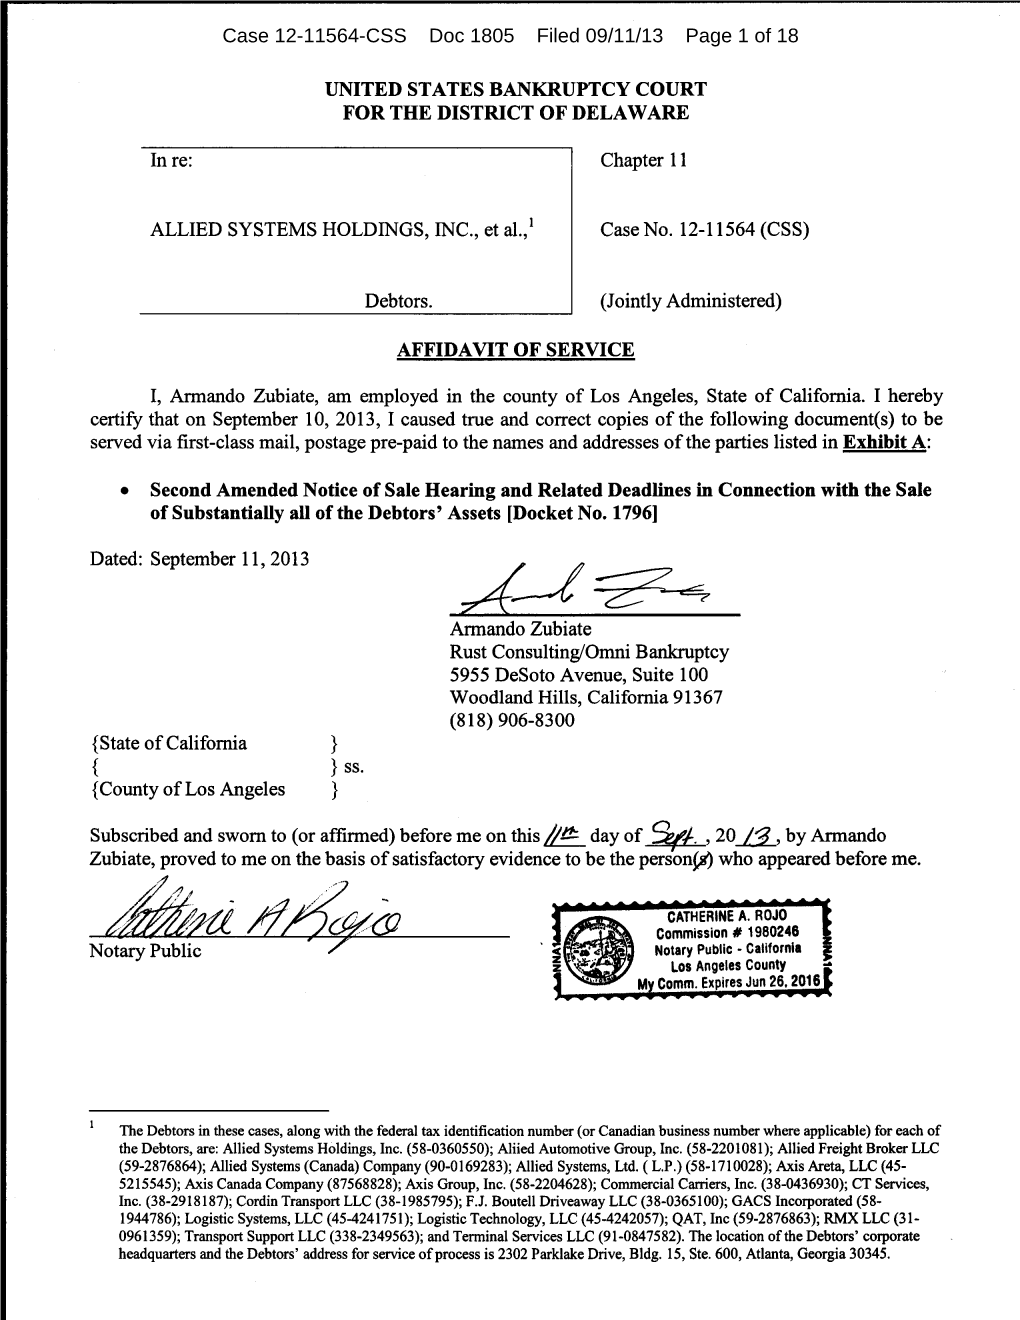 Case 12-11564-CSS Doc 1805 Filed 09/11/13 Page 1 of 18 Case 12-11564-CSS Doc 1805 Filed 09/11/13 Page 2 of 18 Allied Systems Holdings, Inc